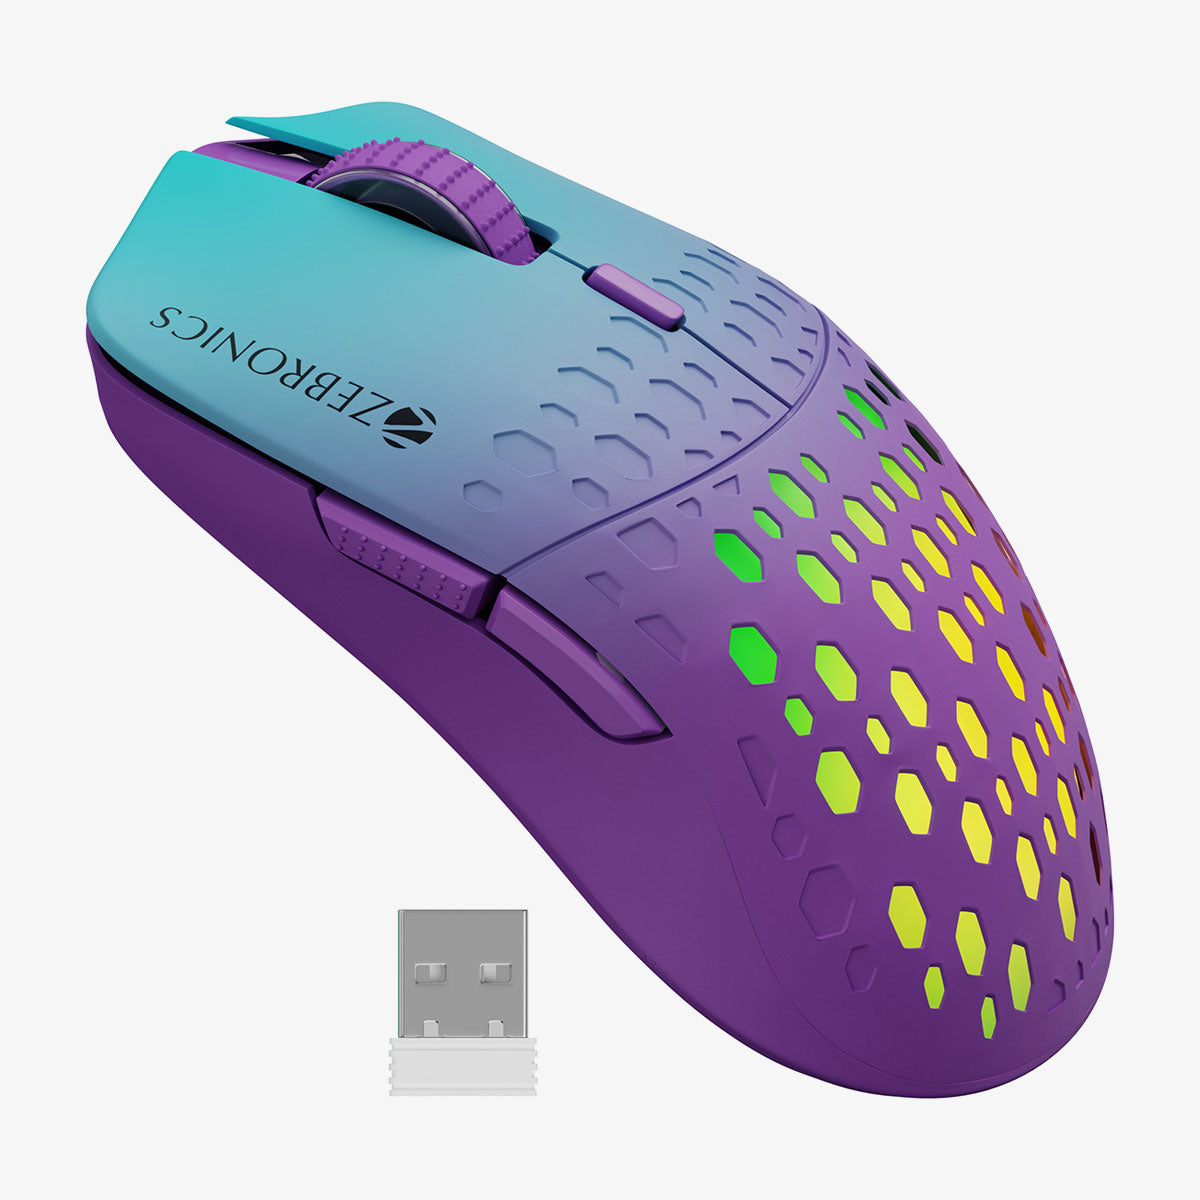 Marine Wireless Gaming Mouse